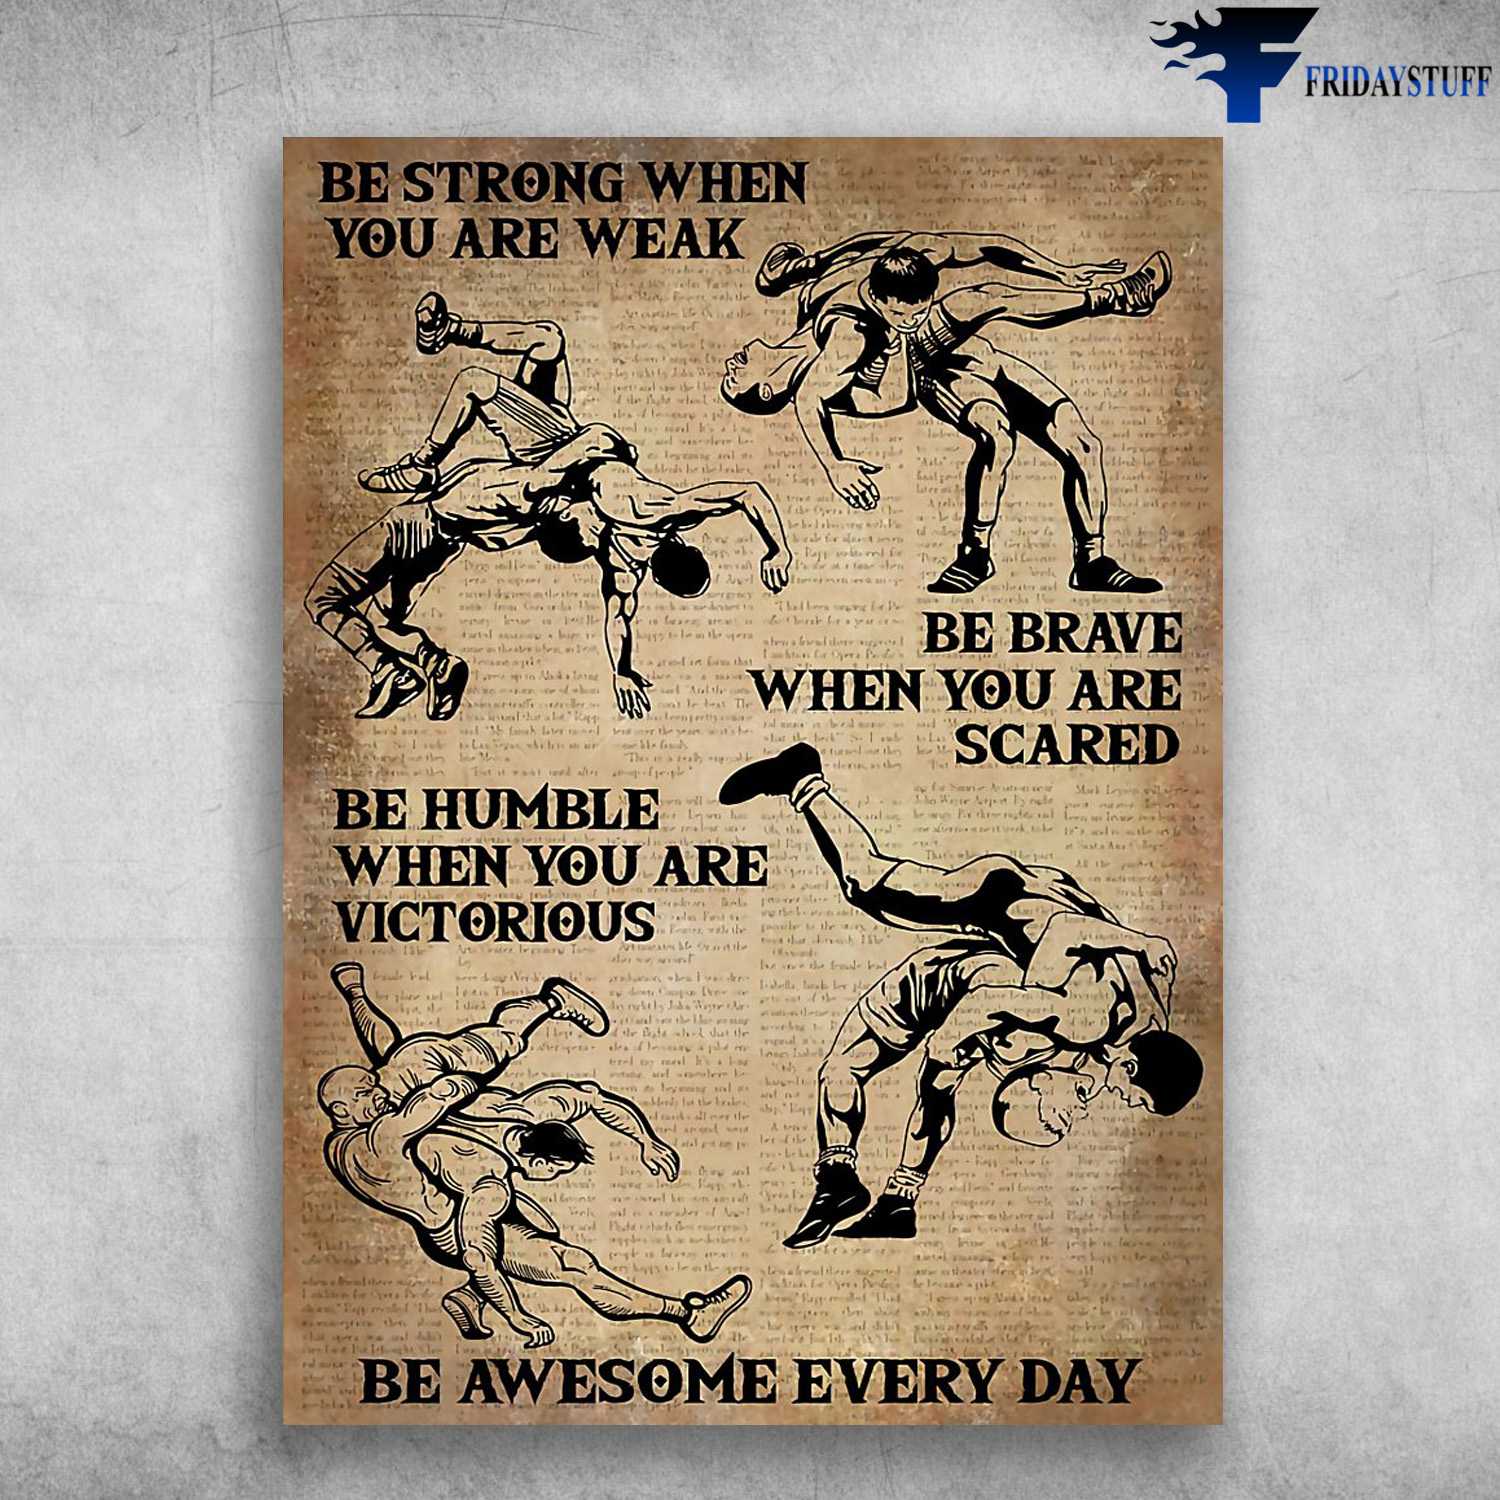 Wrestling Poster, Wrestling Lover, Be Strong When You Are Weak, Be Brave When You Are Scared, Be Humble When You Are Victorious, Be Awesome Every Day